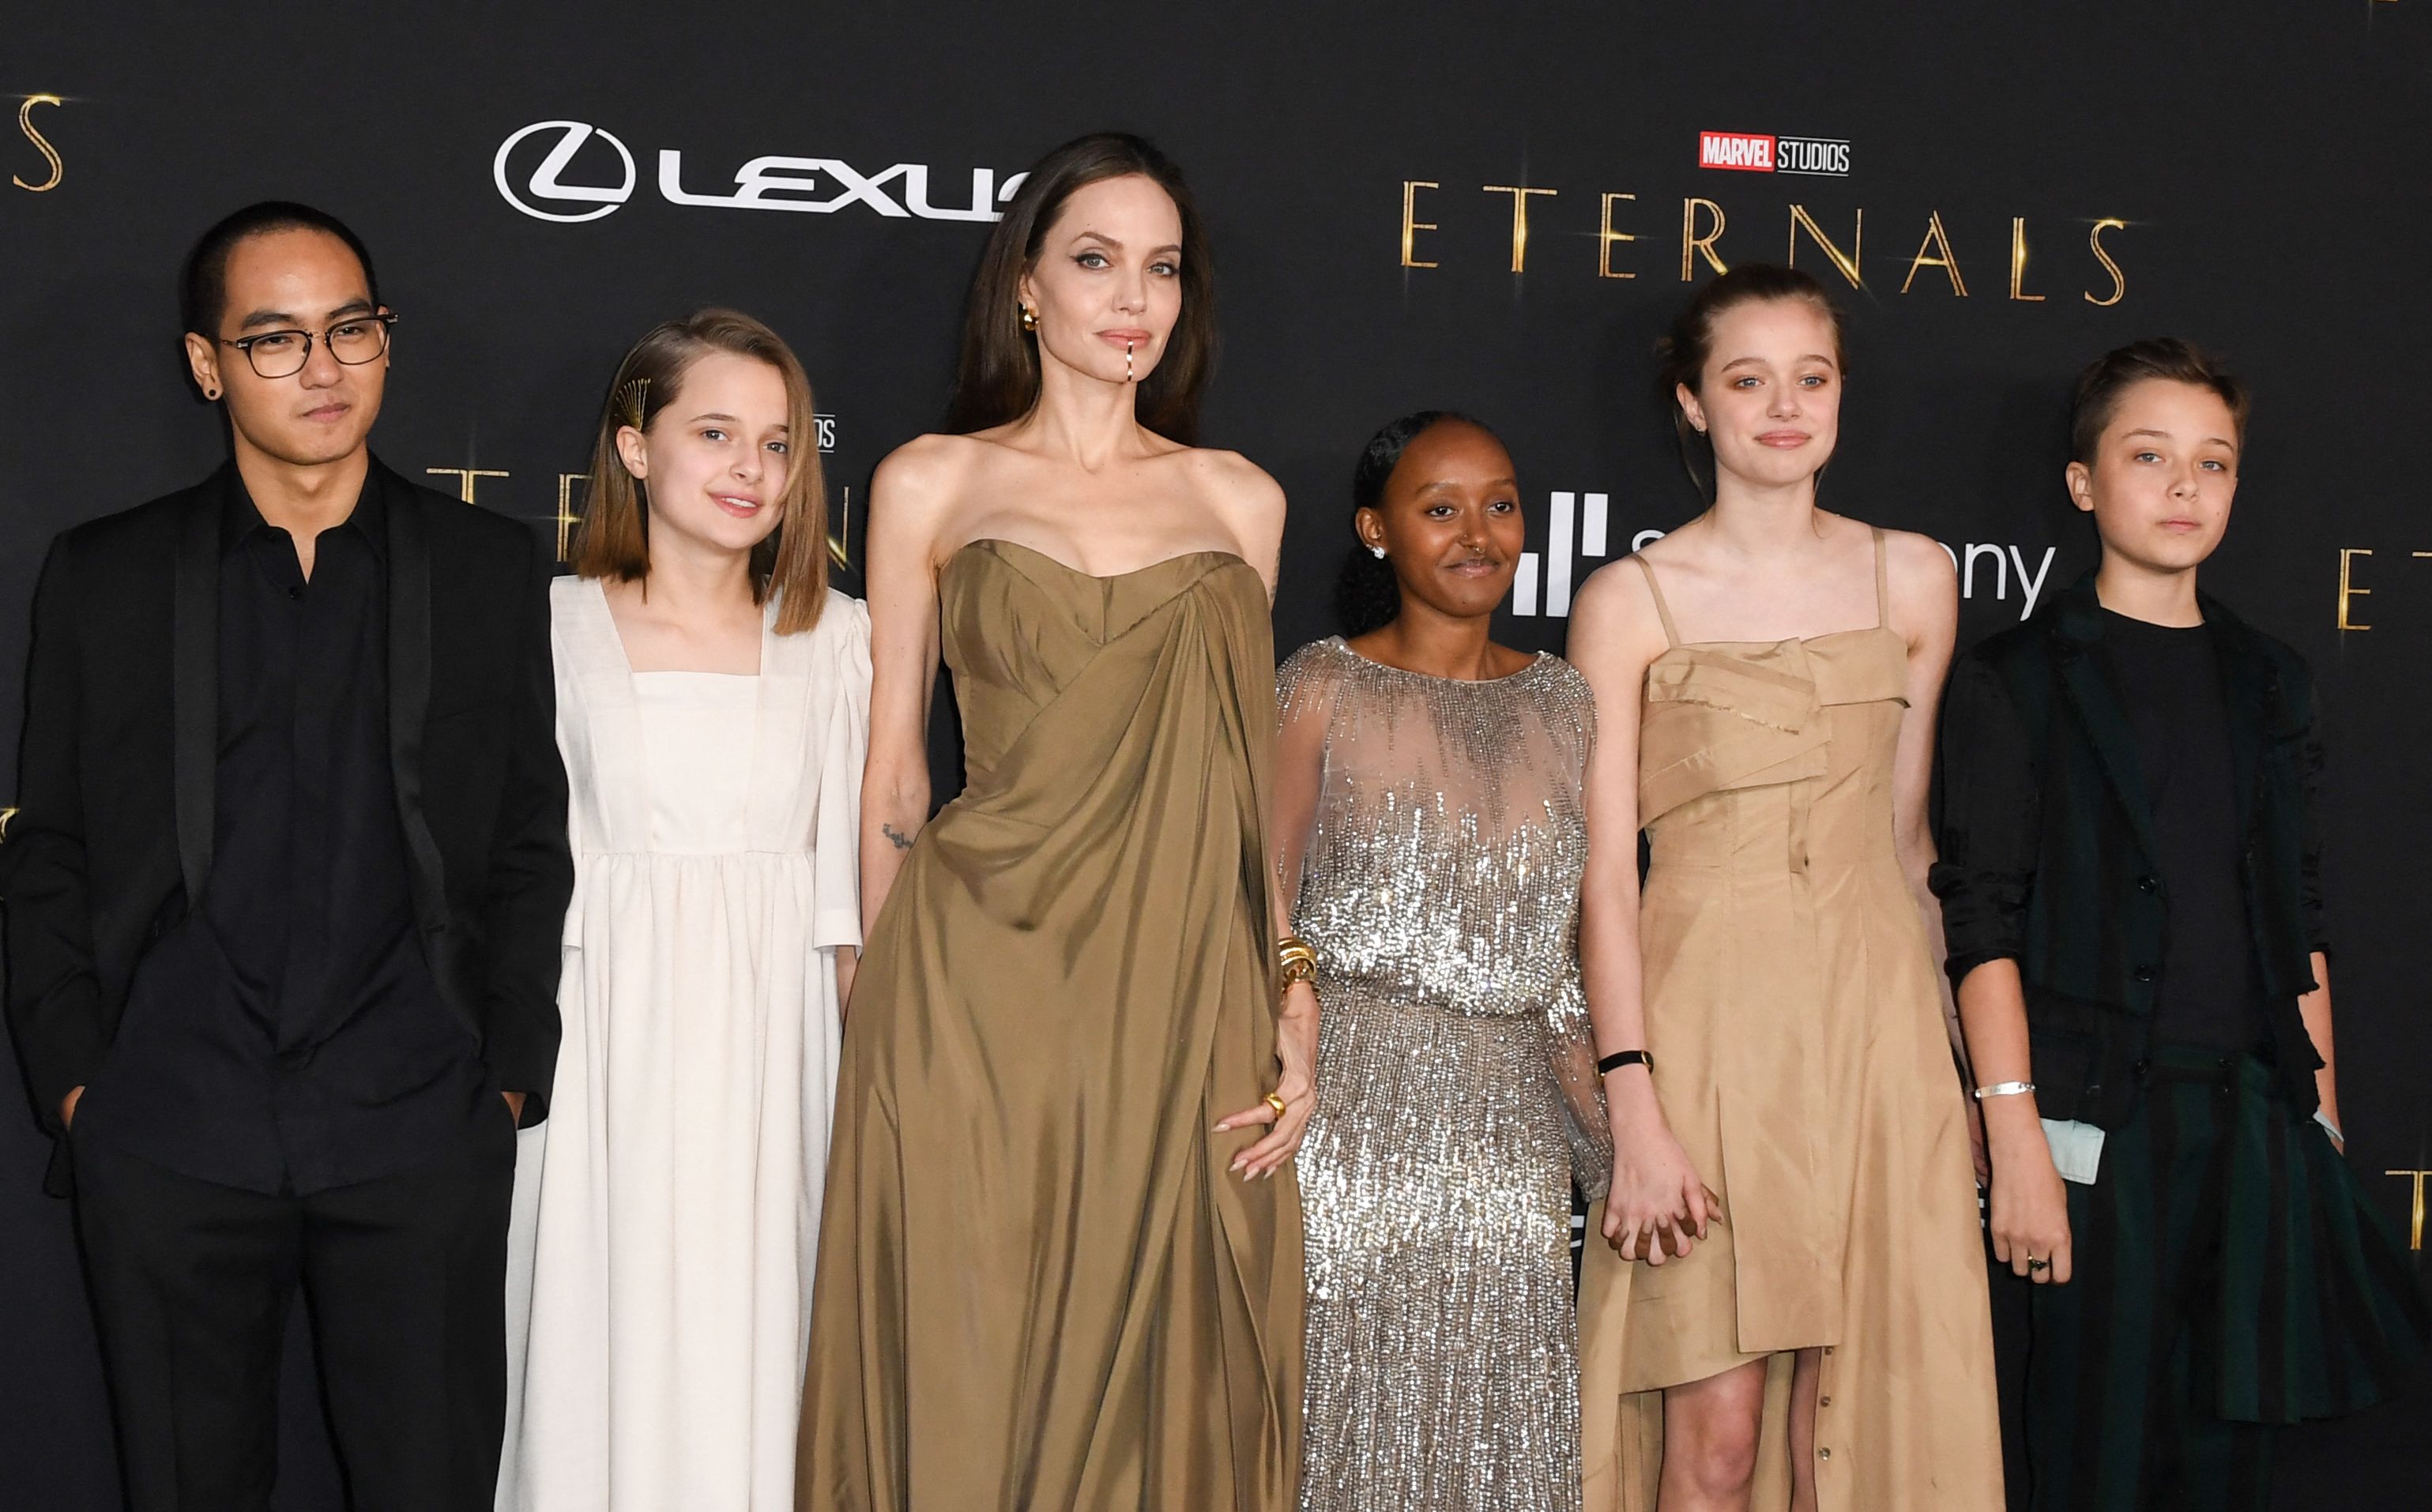 US actress Angelina Jolie and her children Maddox, Vivienne, Zahara, Shiloh and Knox arrive for the world premiere of Marvel Studios' "Eternals" at the Dolby theatre in Los Angeles, October 18, 2021. | Source: Getty Images